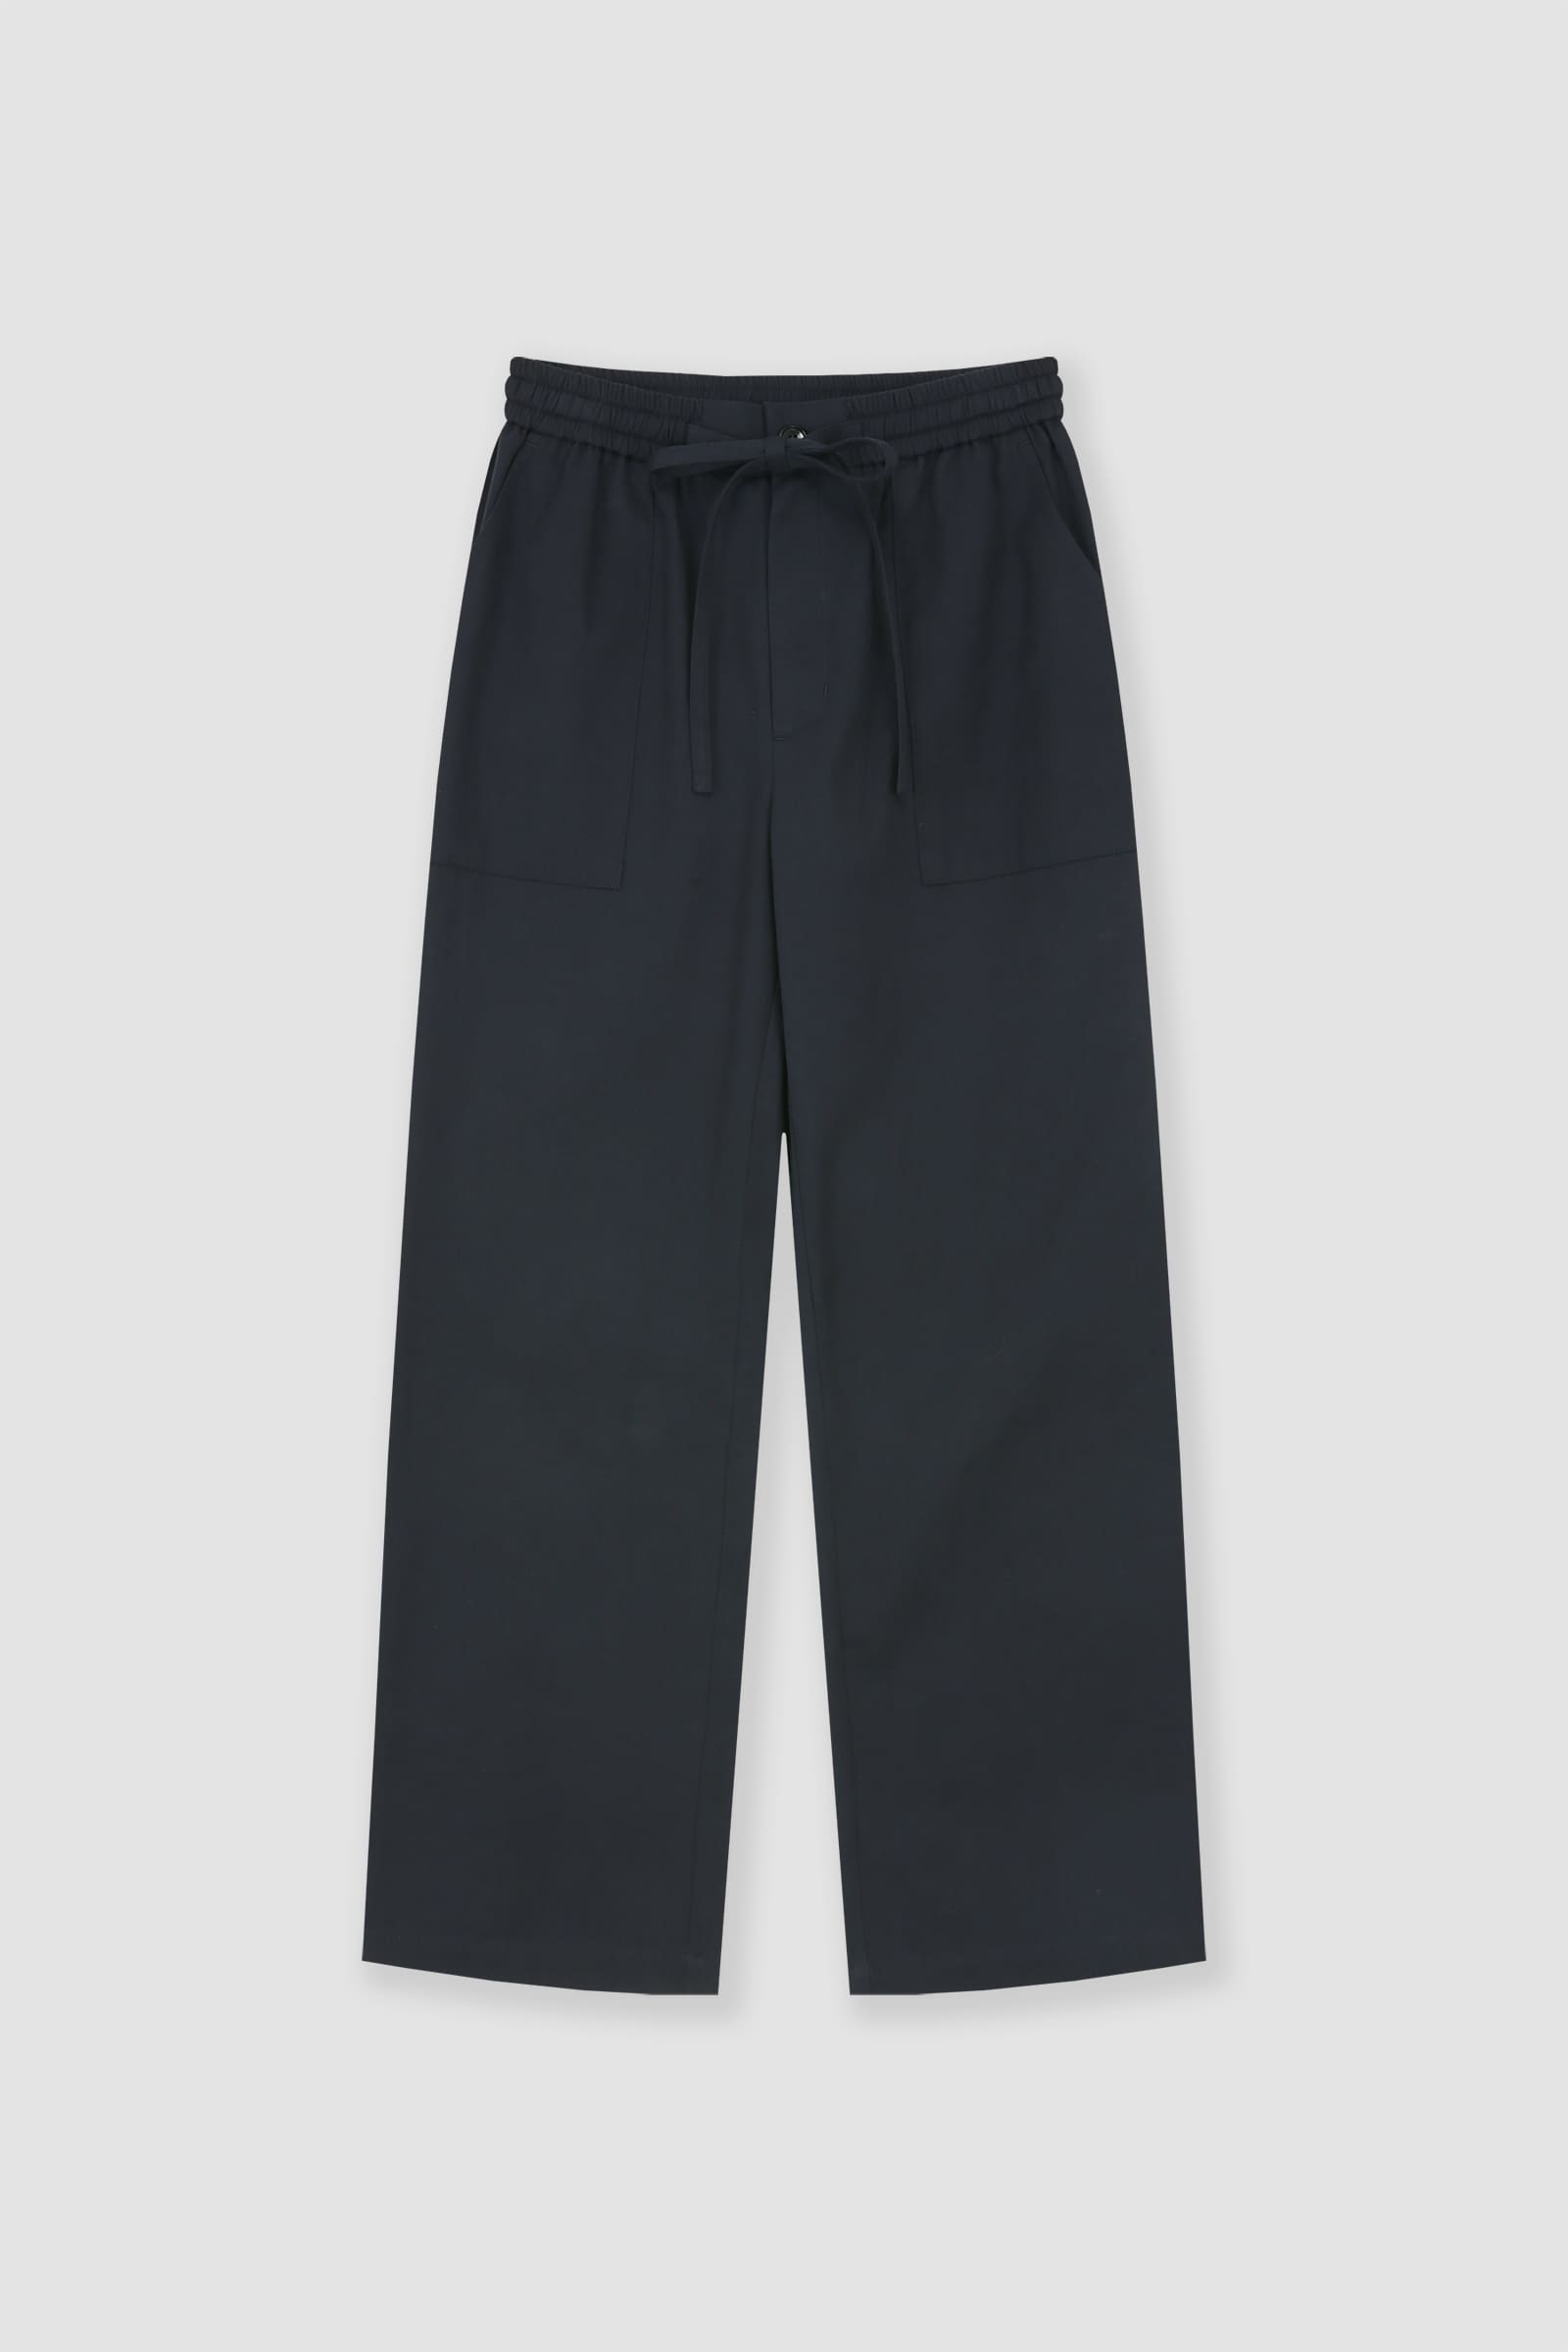 [2nd] String Cotton Pants